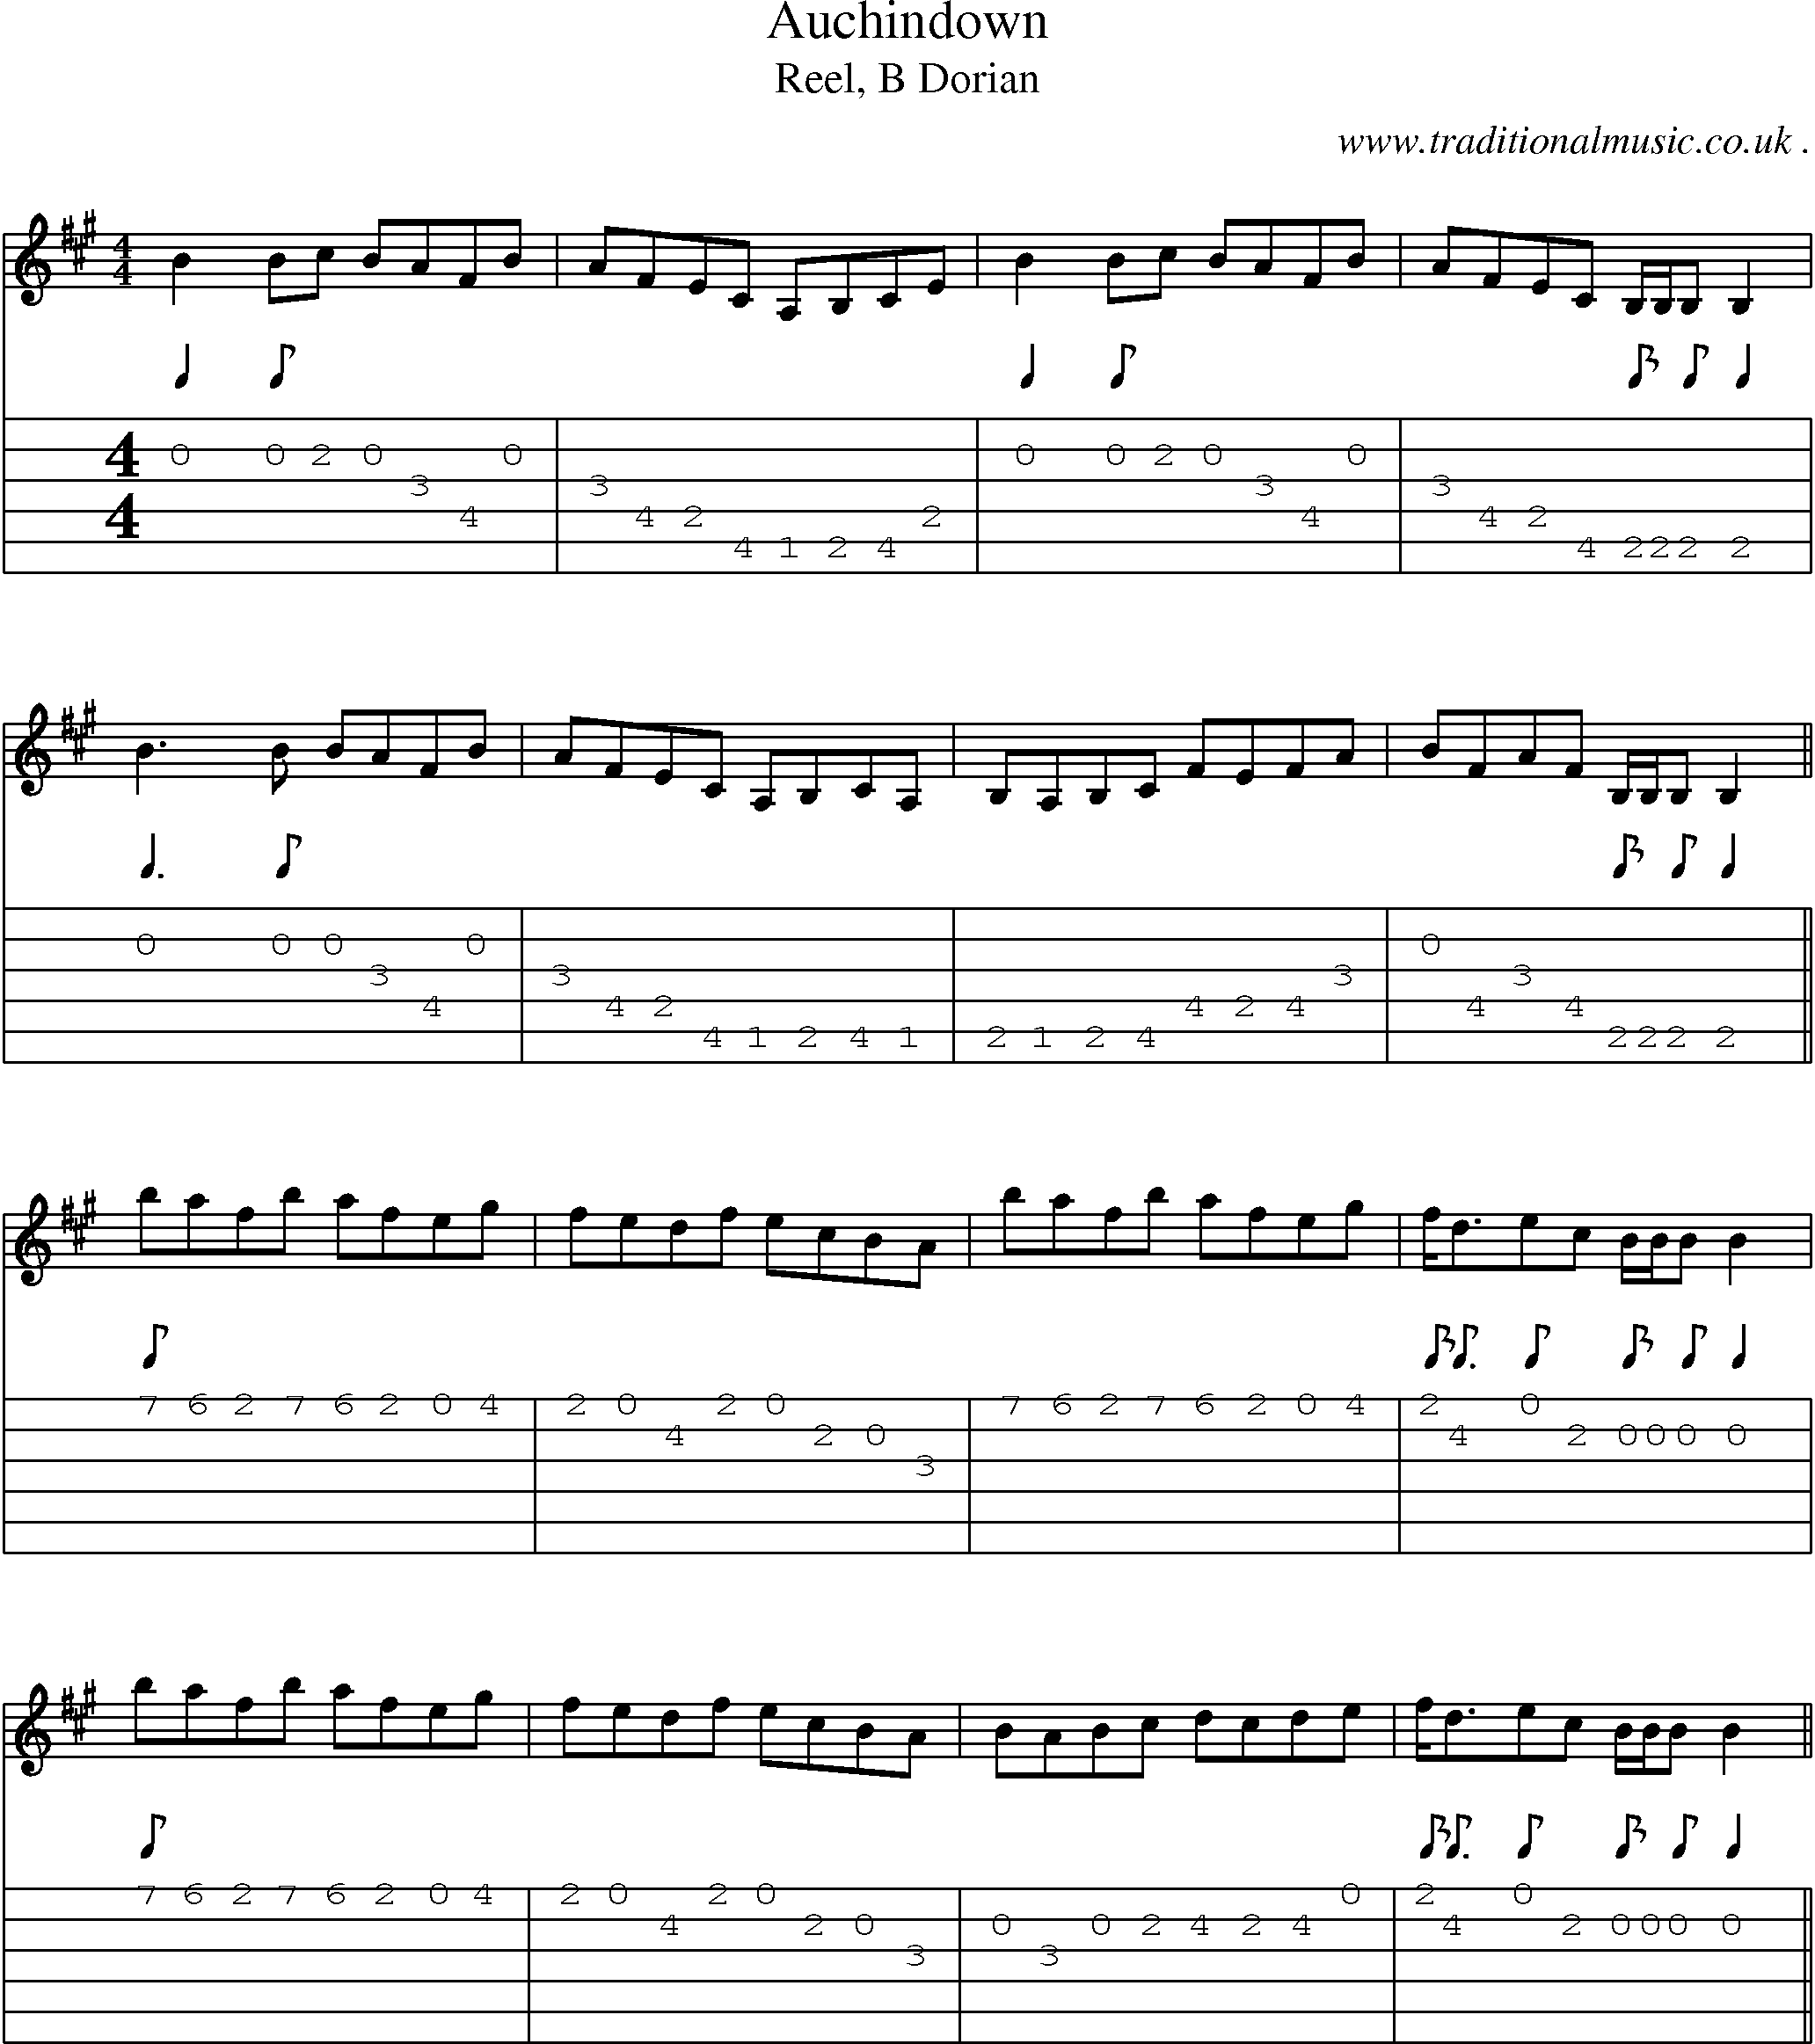 Sheet-music  score, Chords and Guitar Tabs for Auchindown